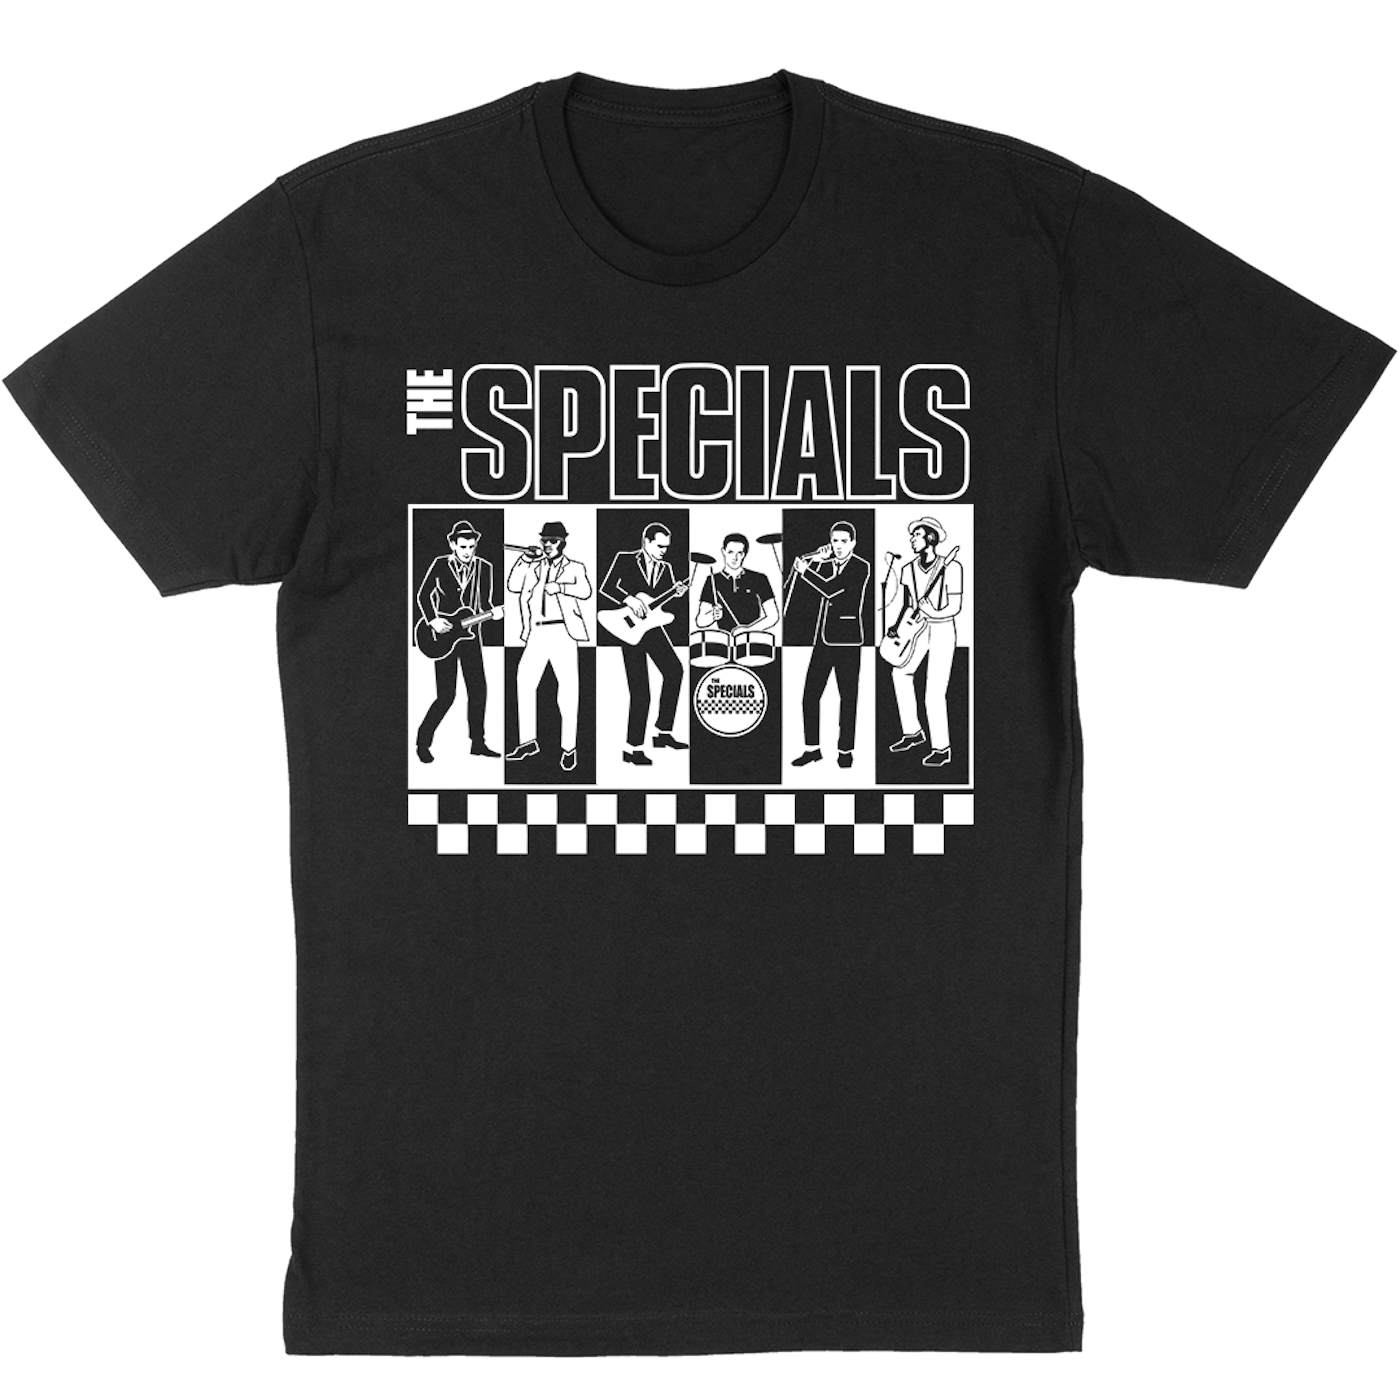 The Specials "BW" T-Shirt